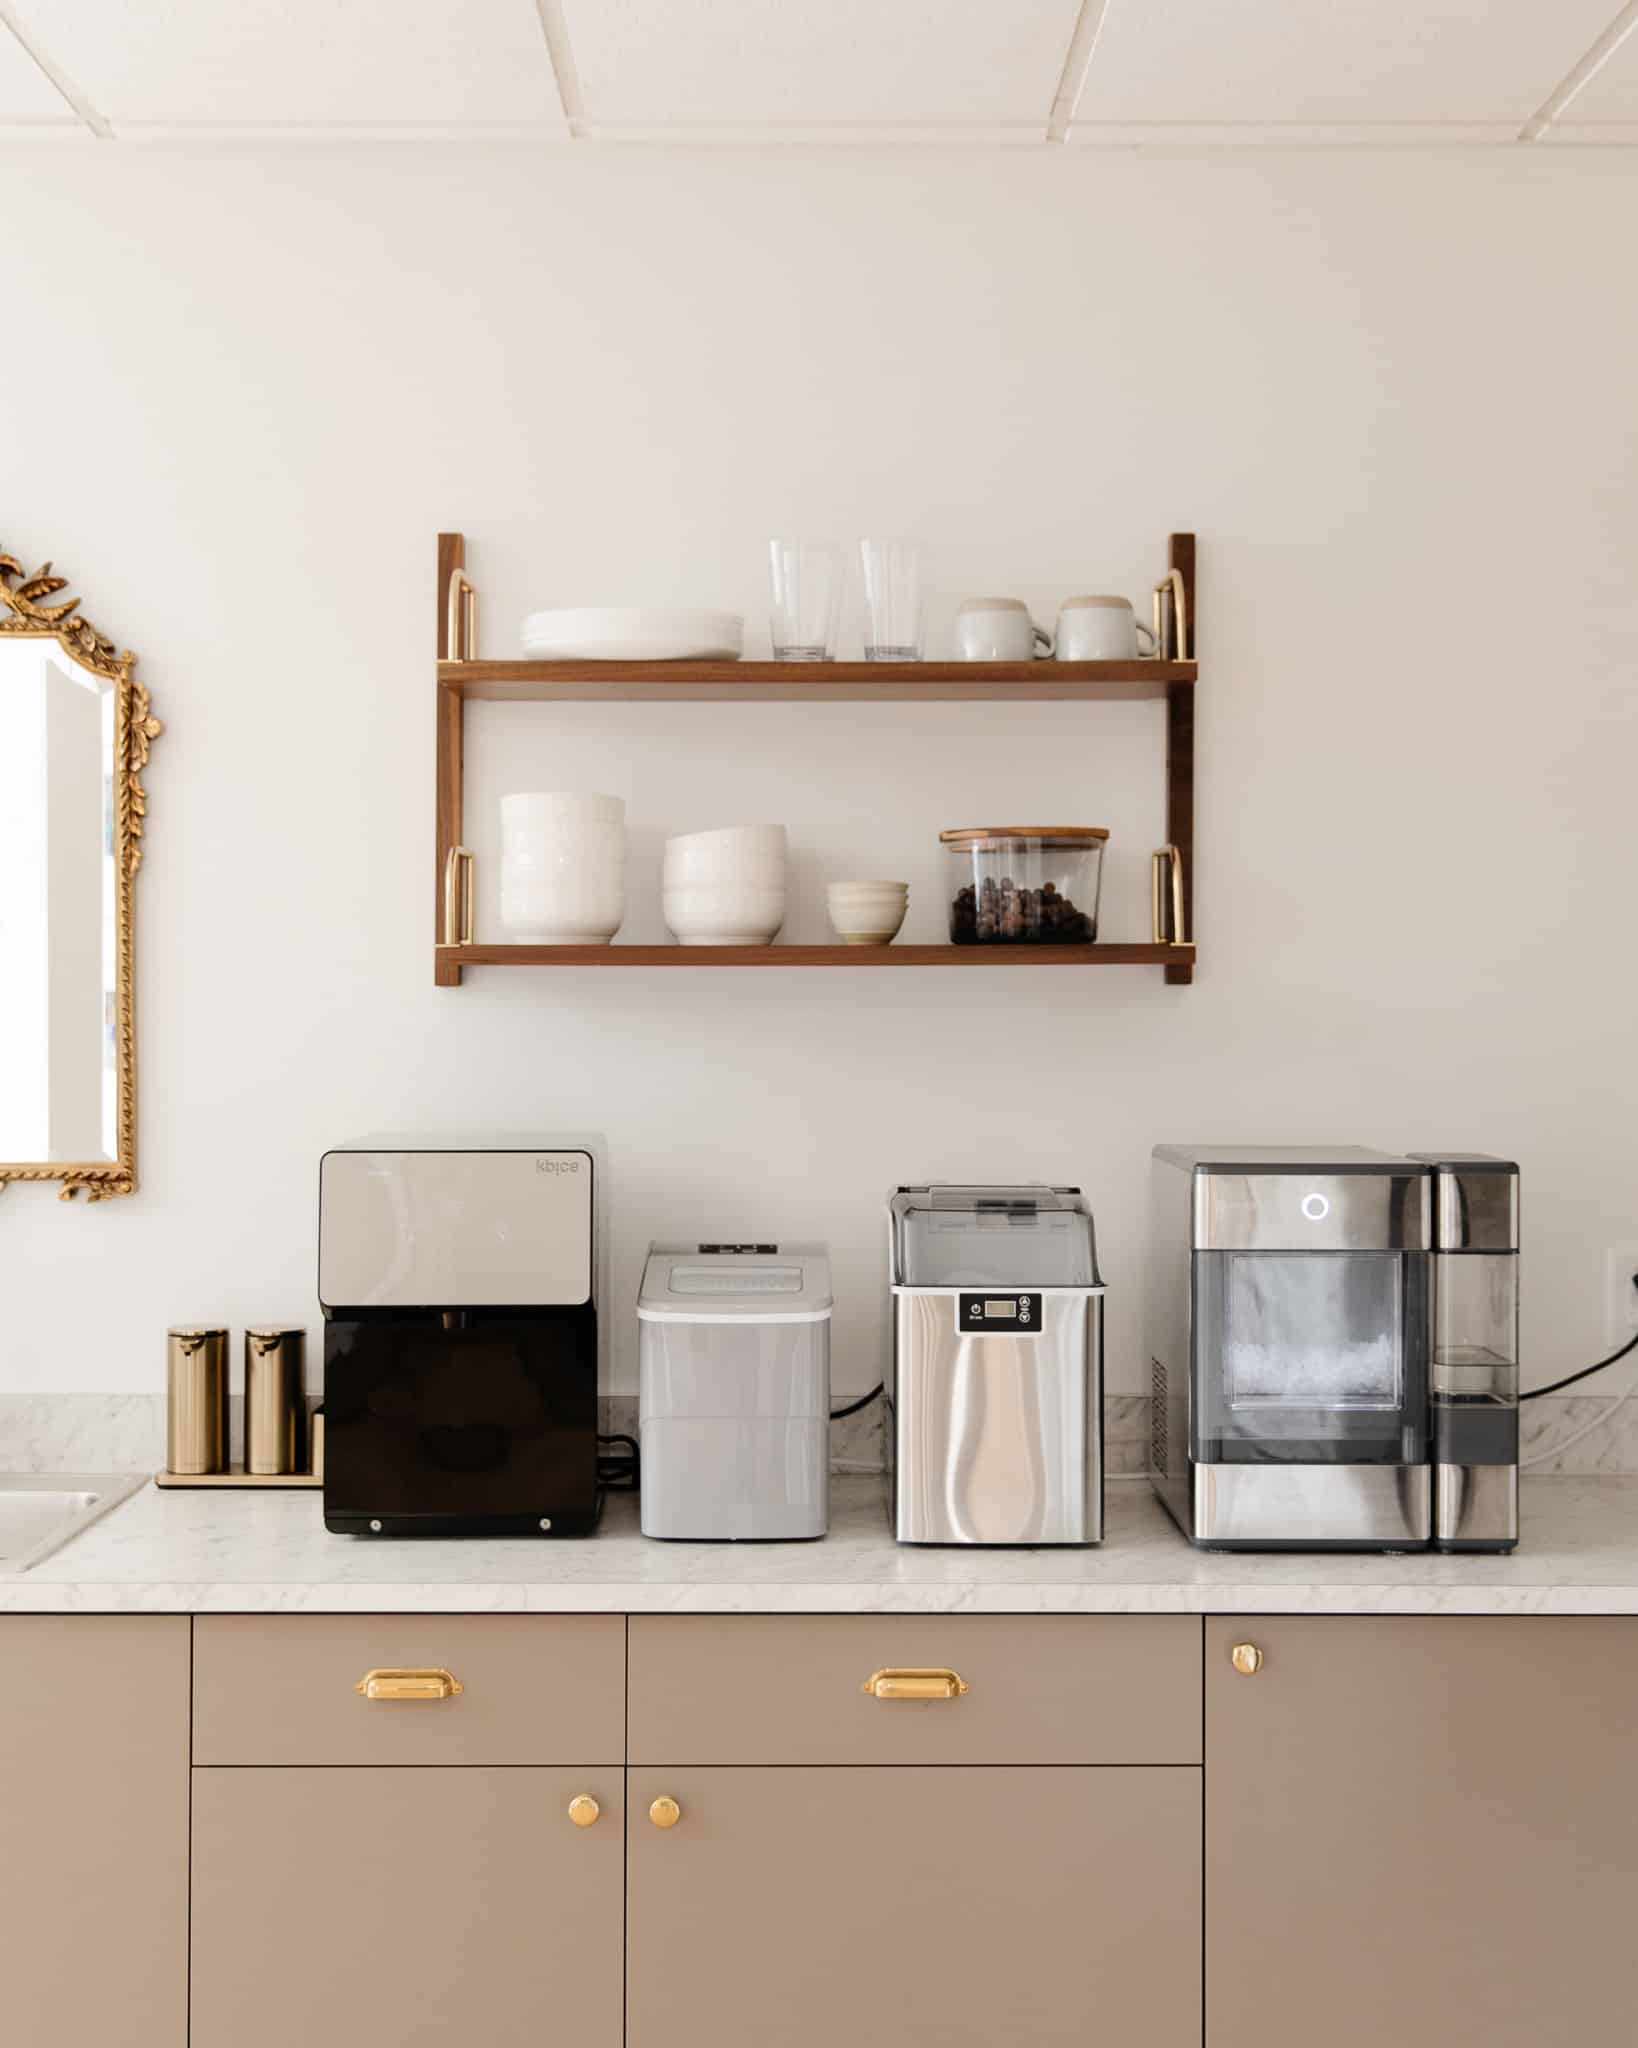 The 3 Best Countertop Ice Makers in 2023